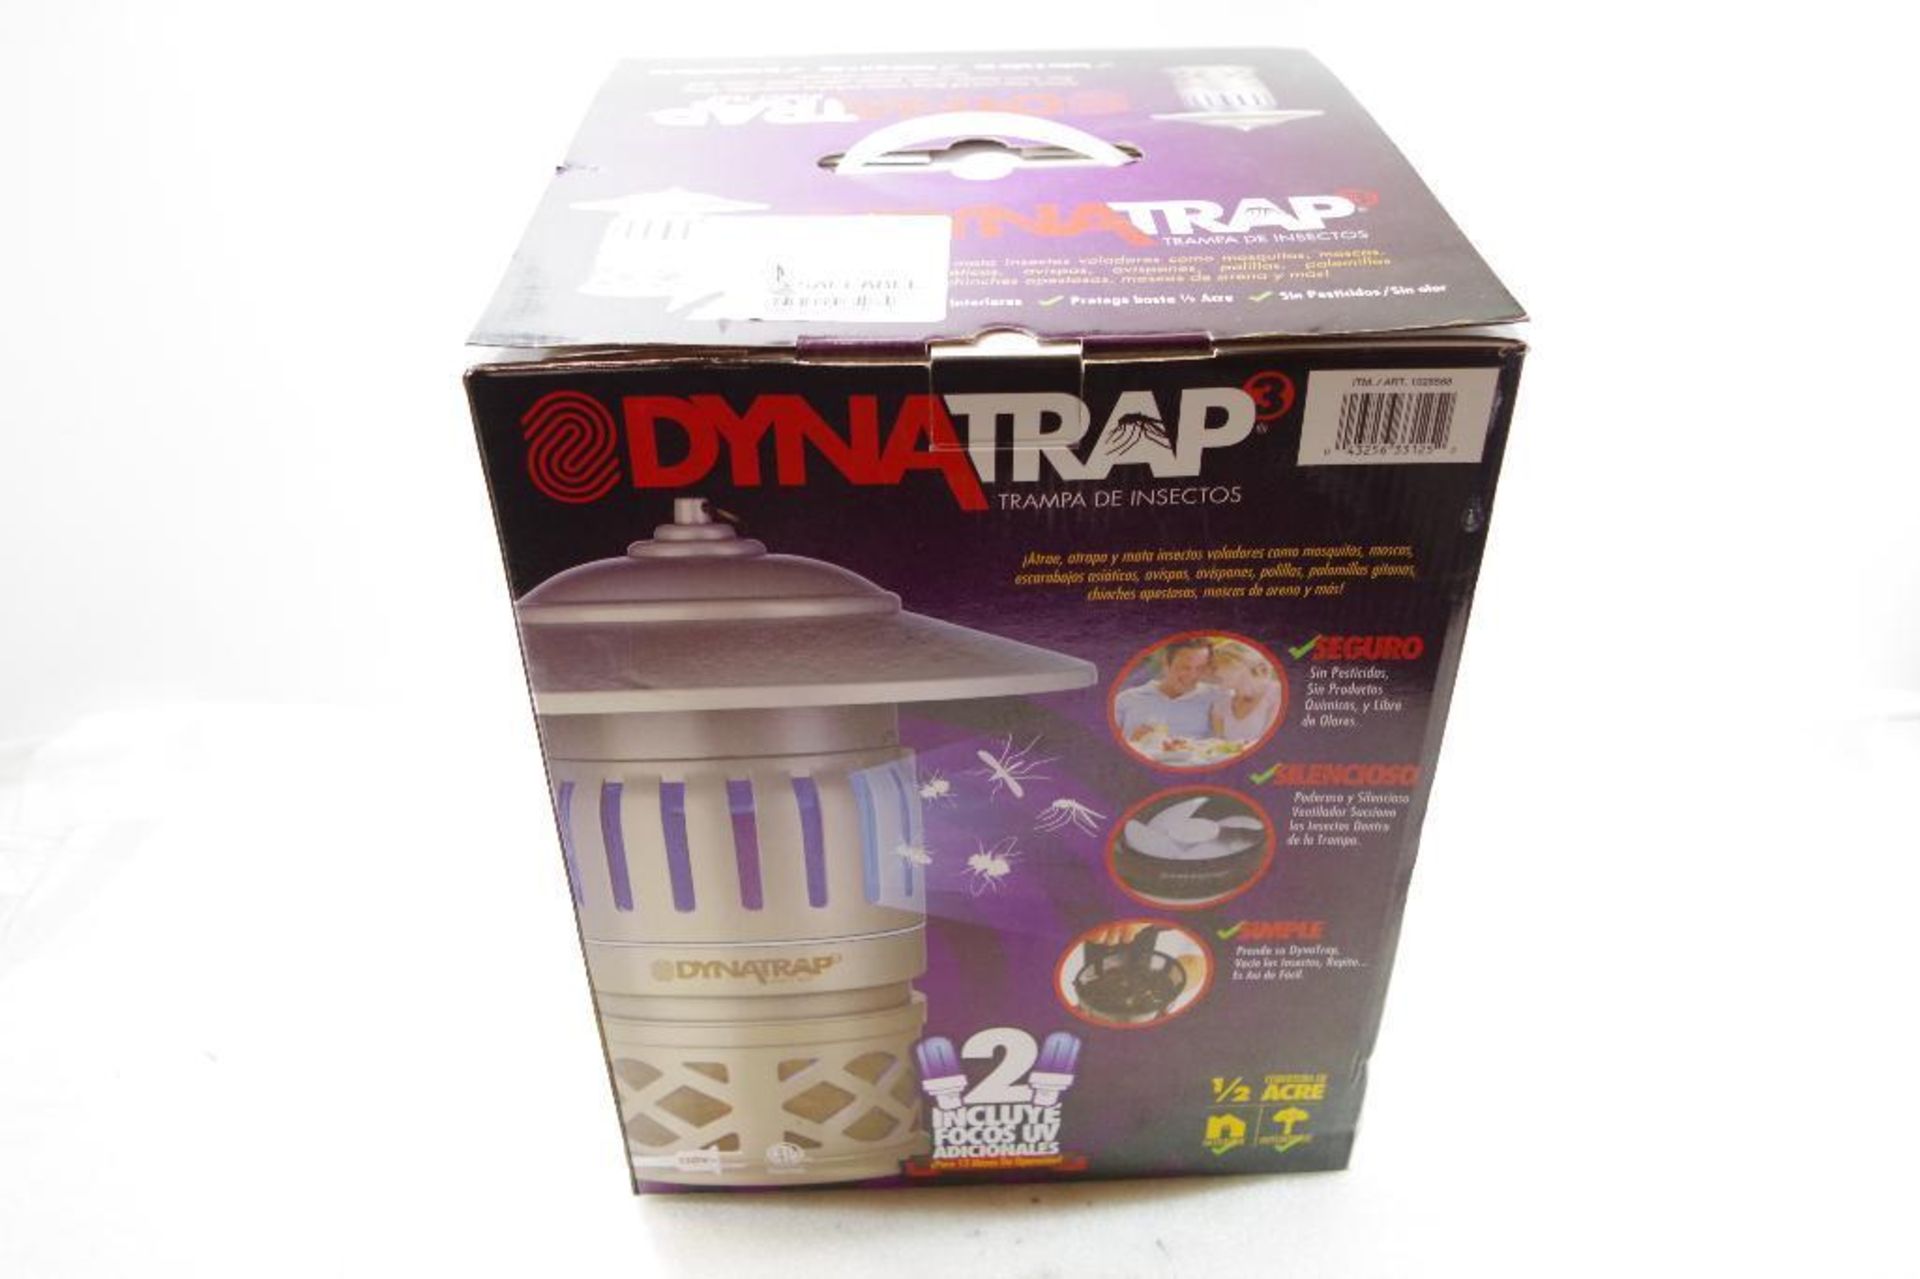 DYNA TRAP Insect & Mosquito Trap - Image 2 of 2